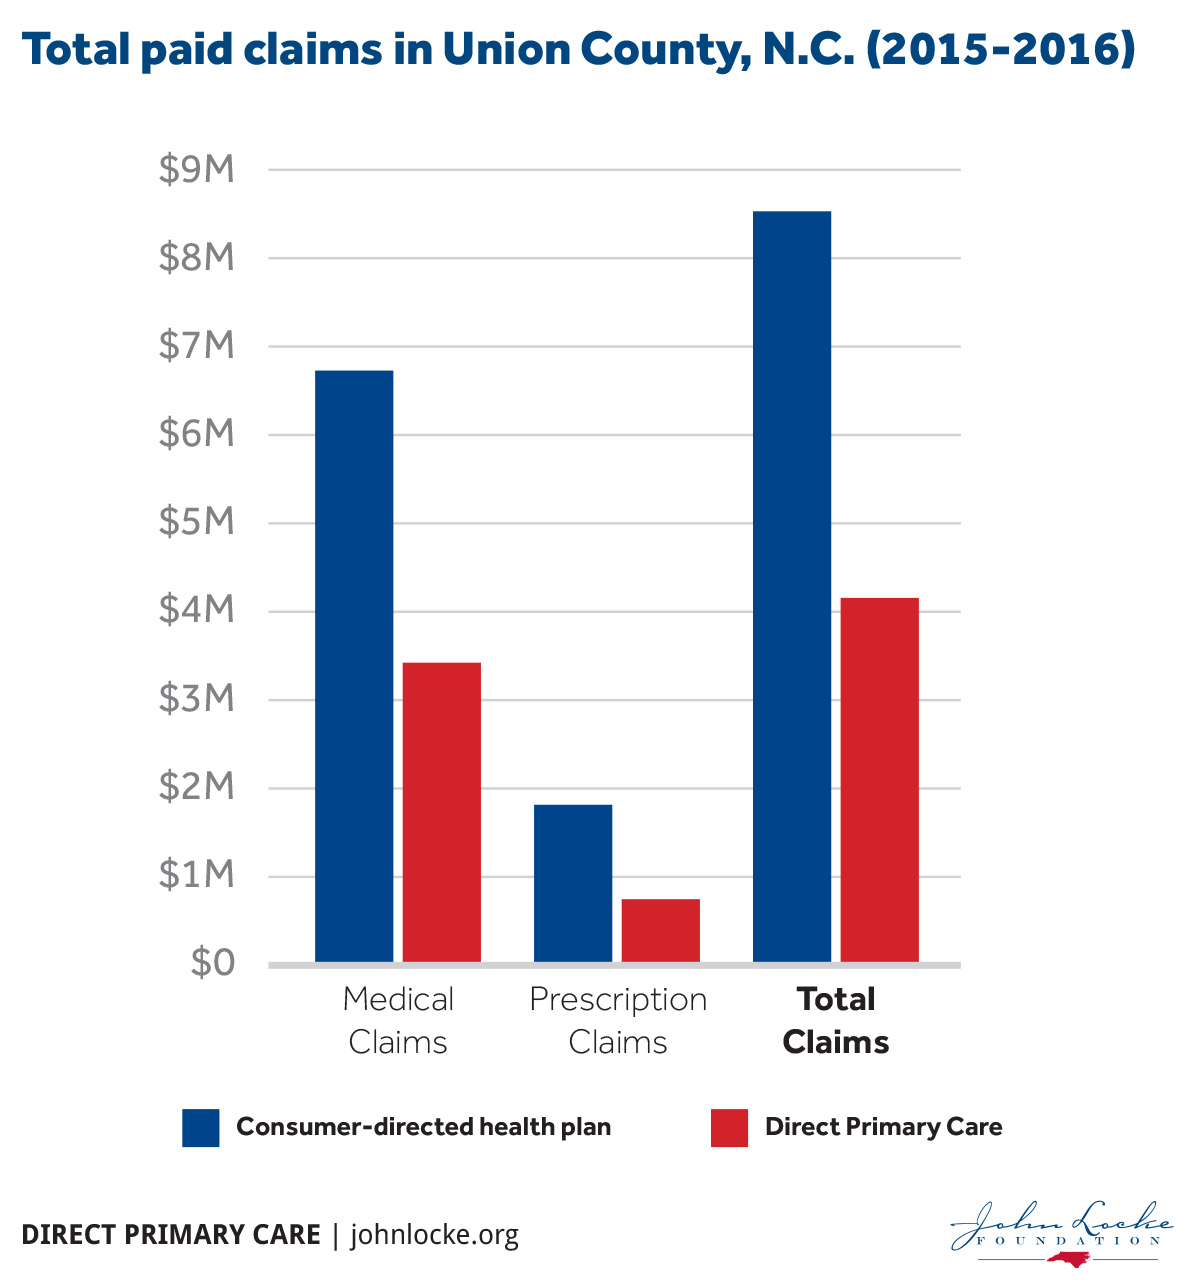 Total paid claims in Union County, N.C. (2015-2016)